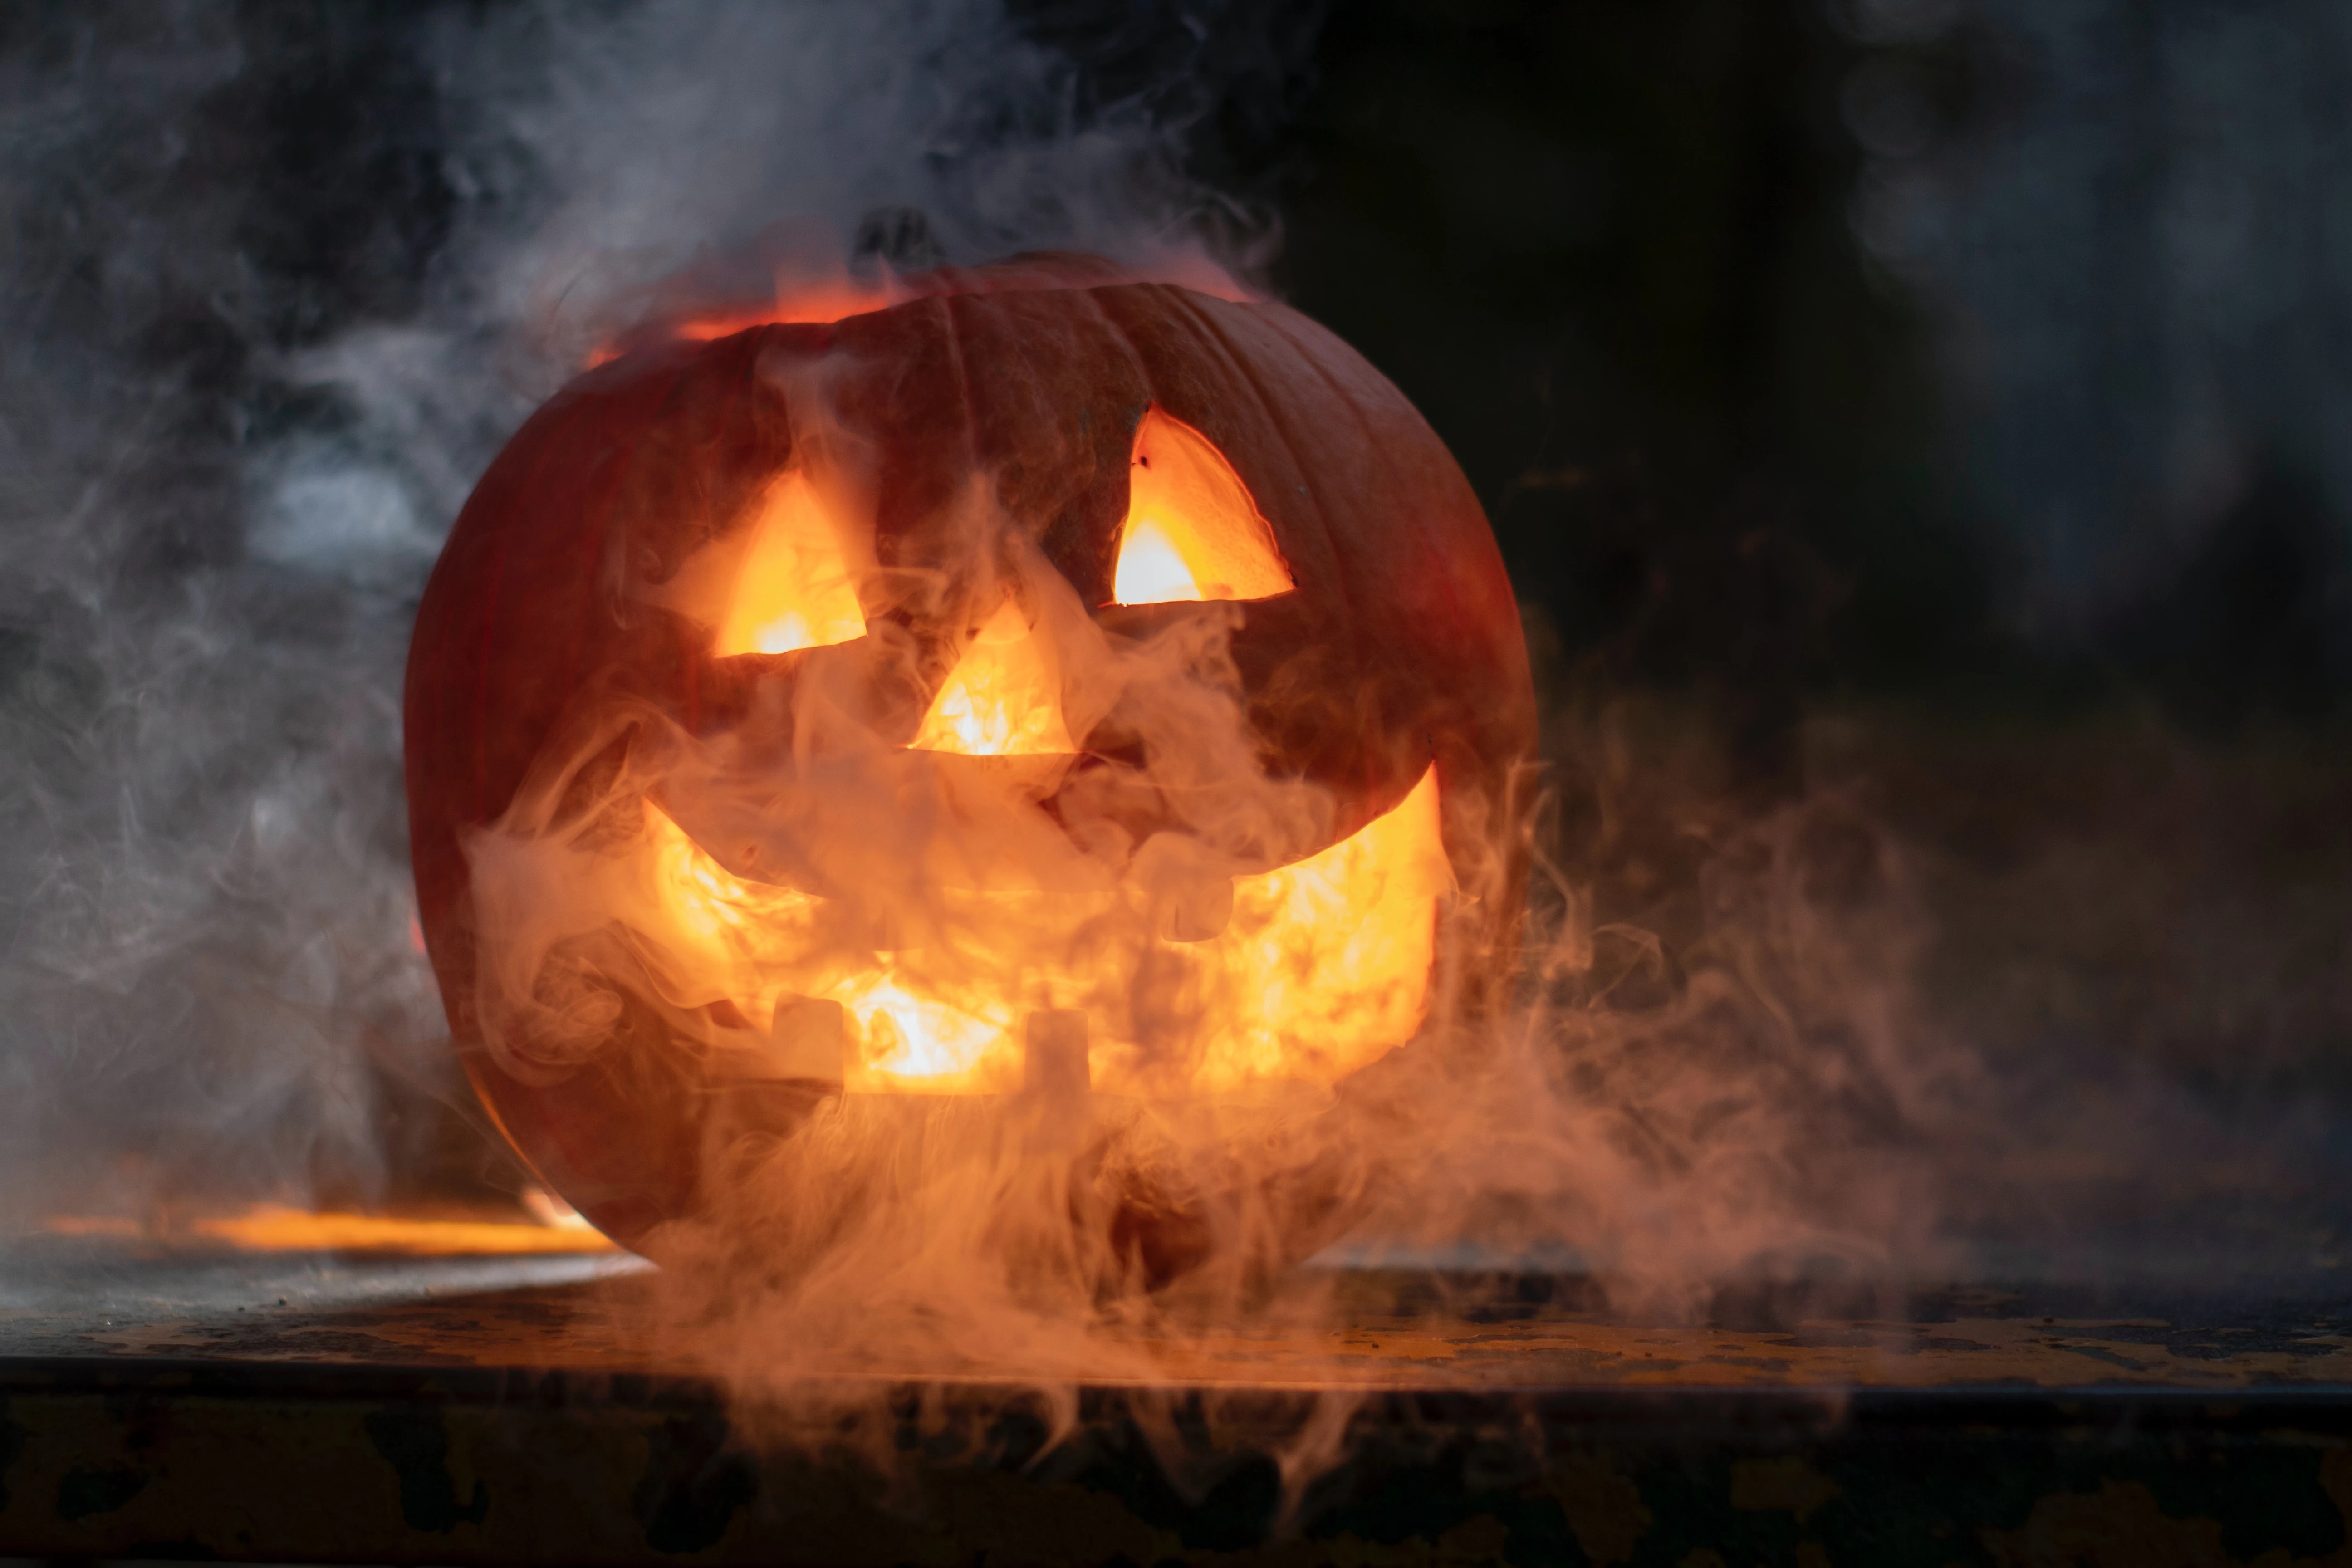 Share Your Spooktacular Halloween Moments